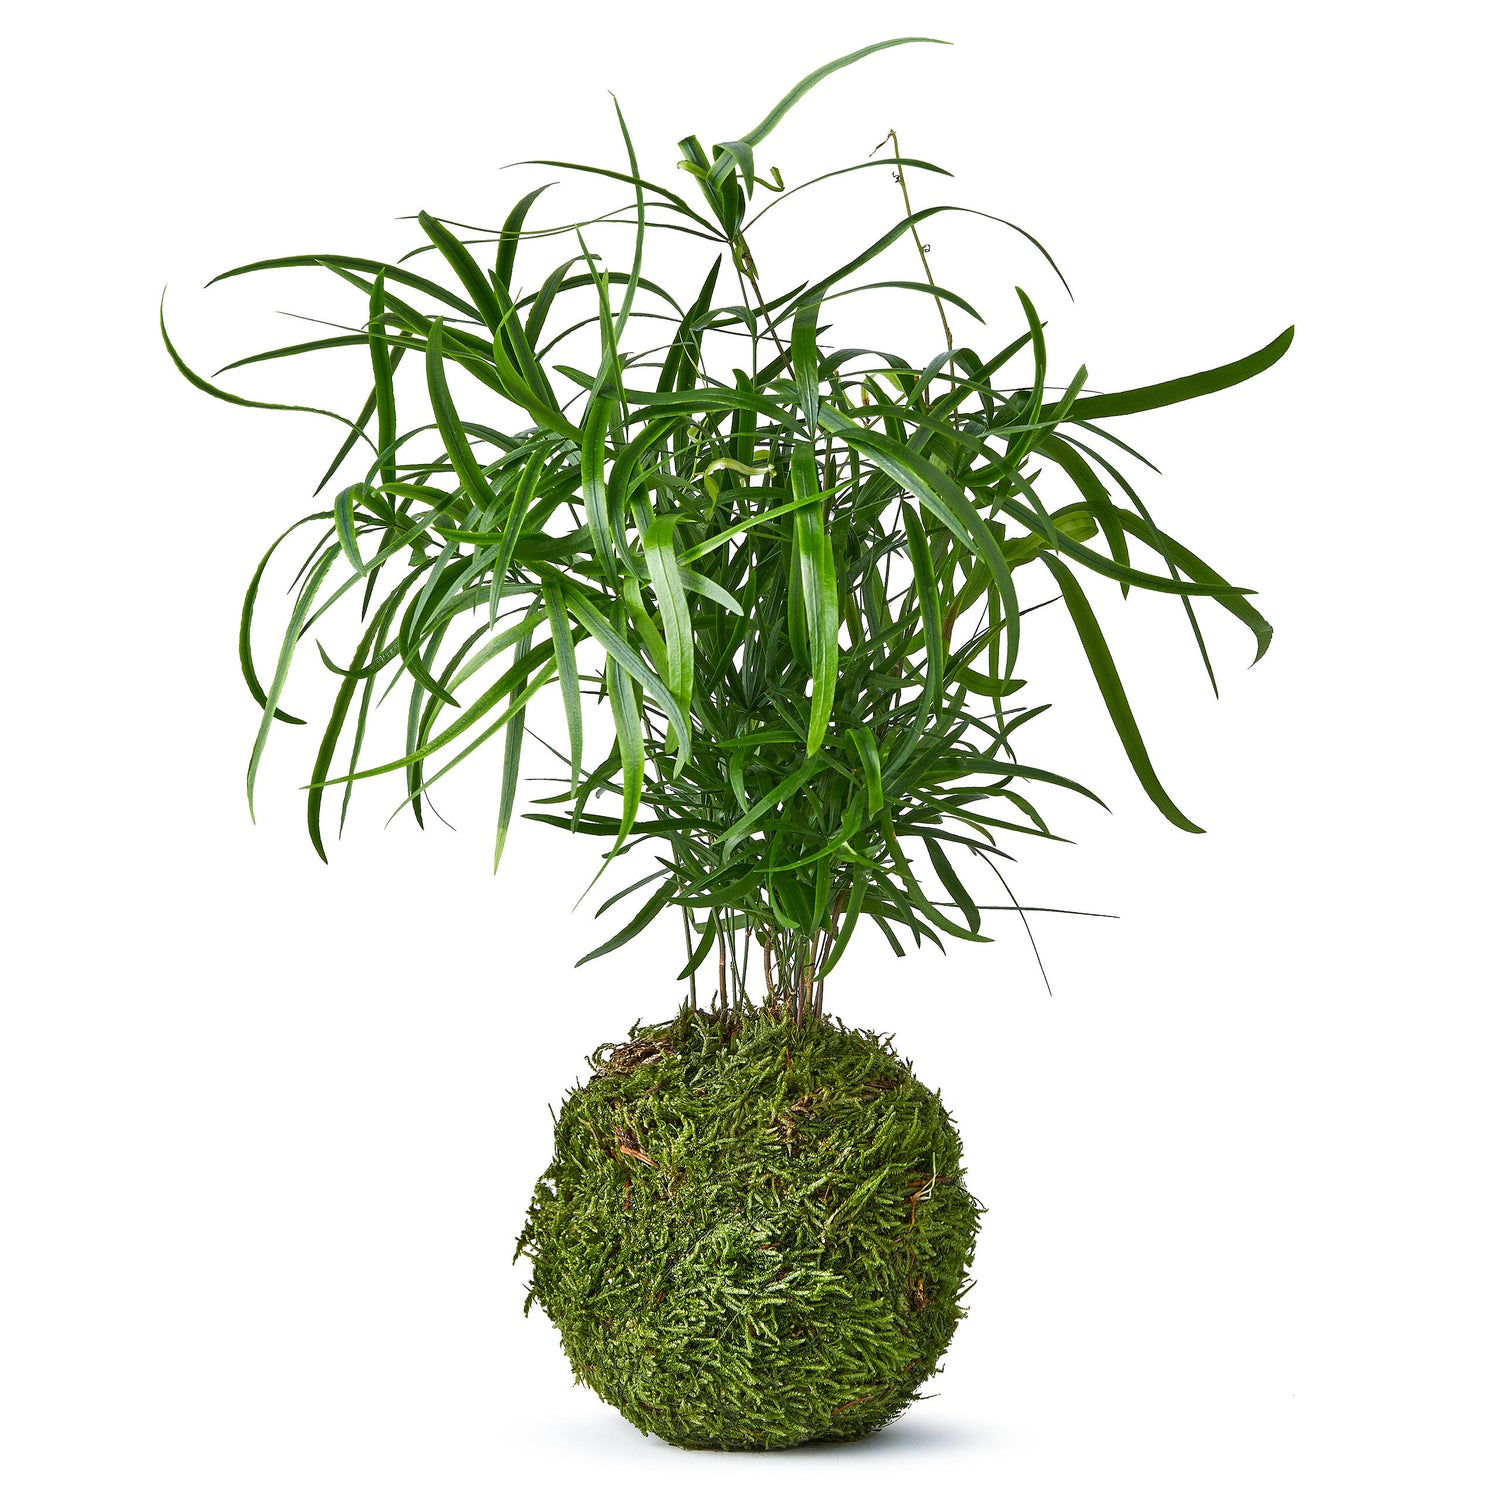 Corporate gift 20 pack - Fern kokedama with tray and chocolate £29.99 each Tranquil Plants